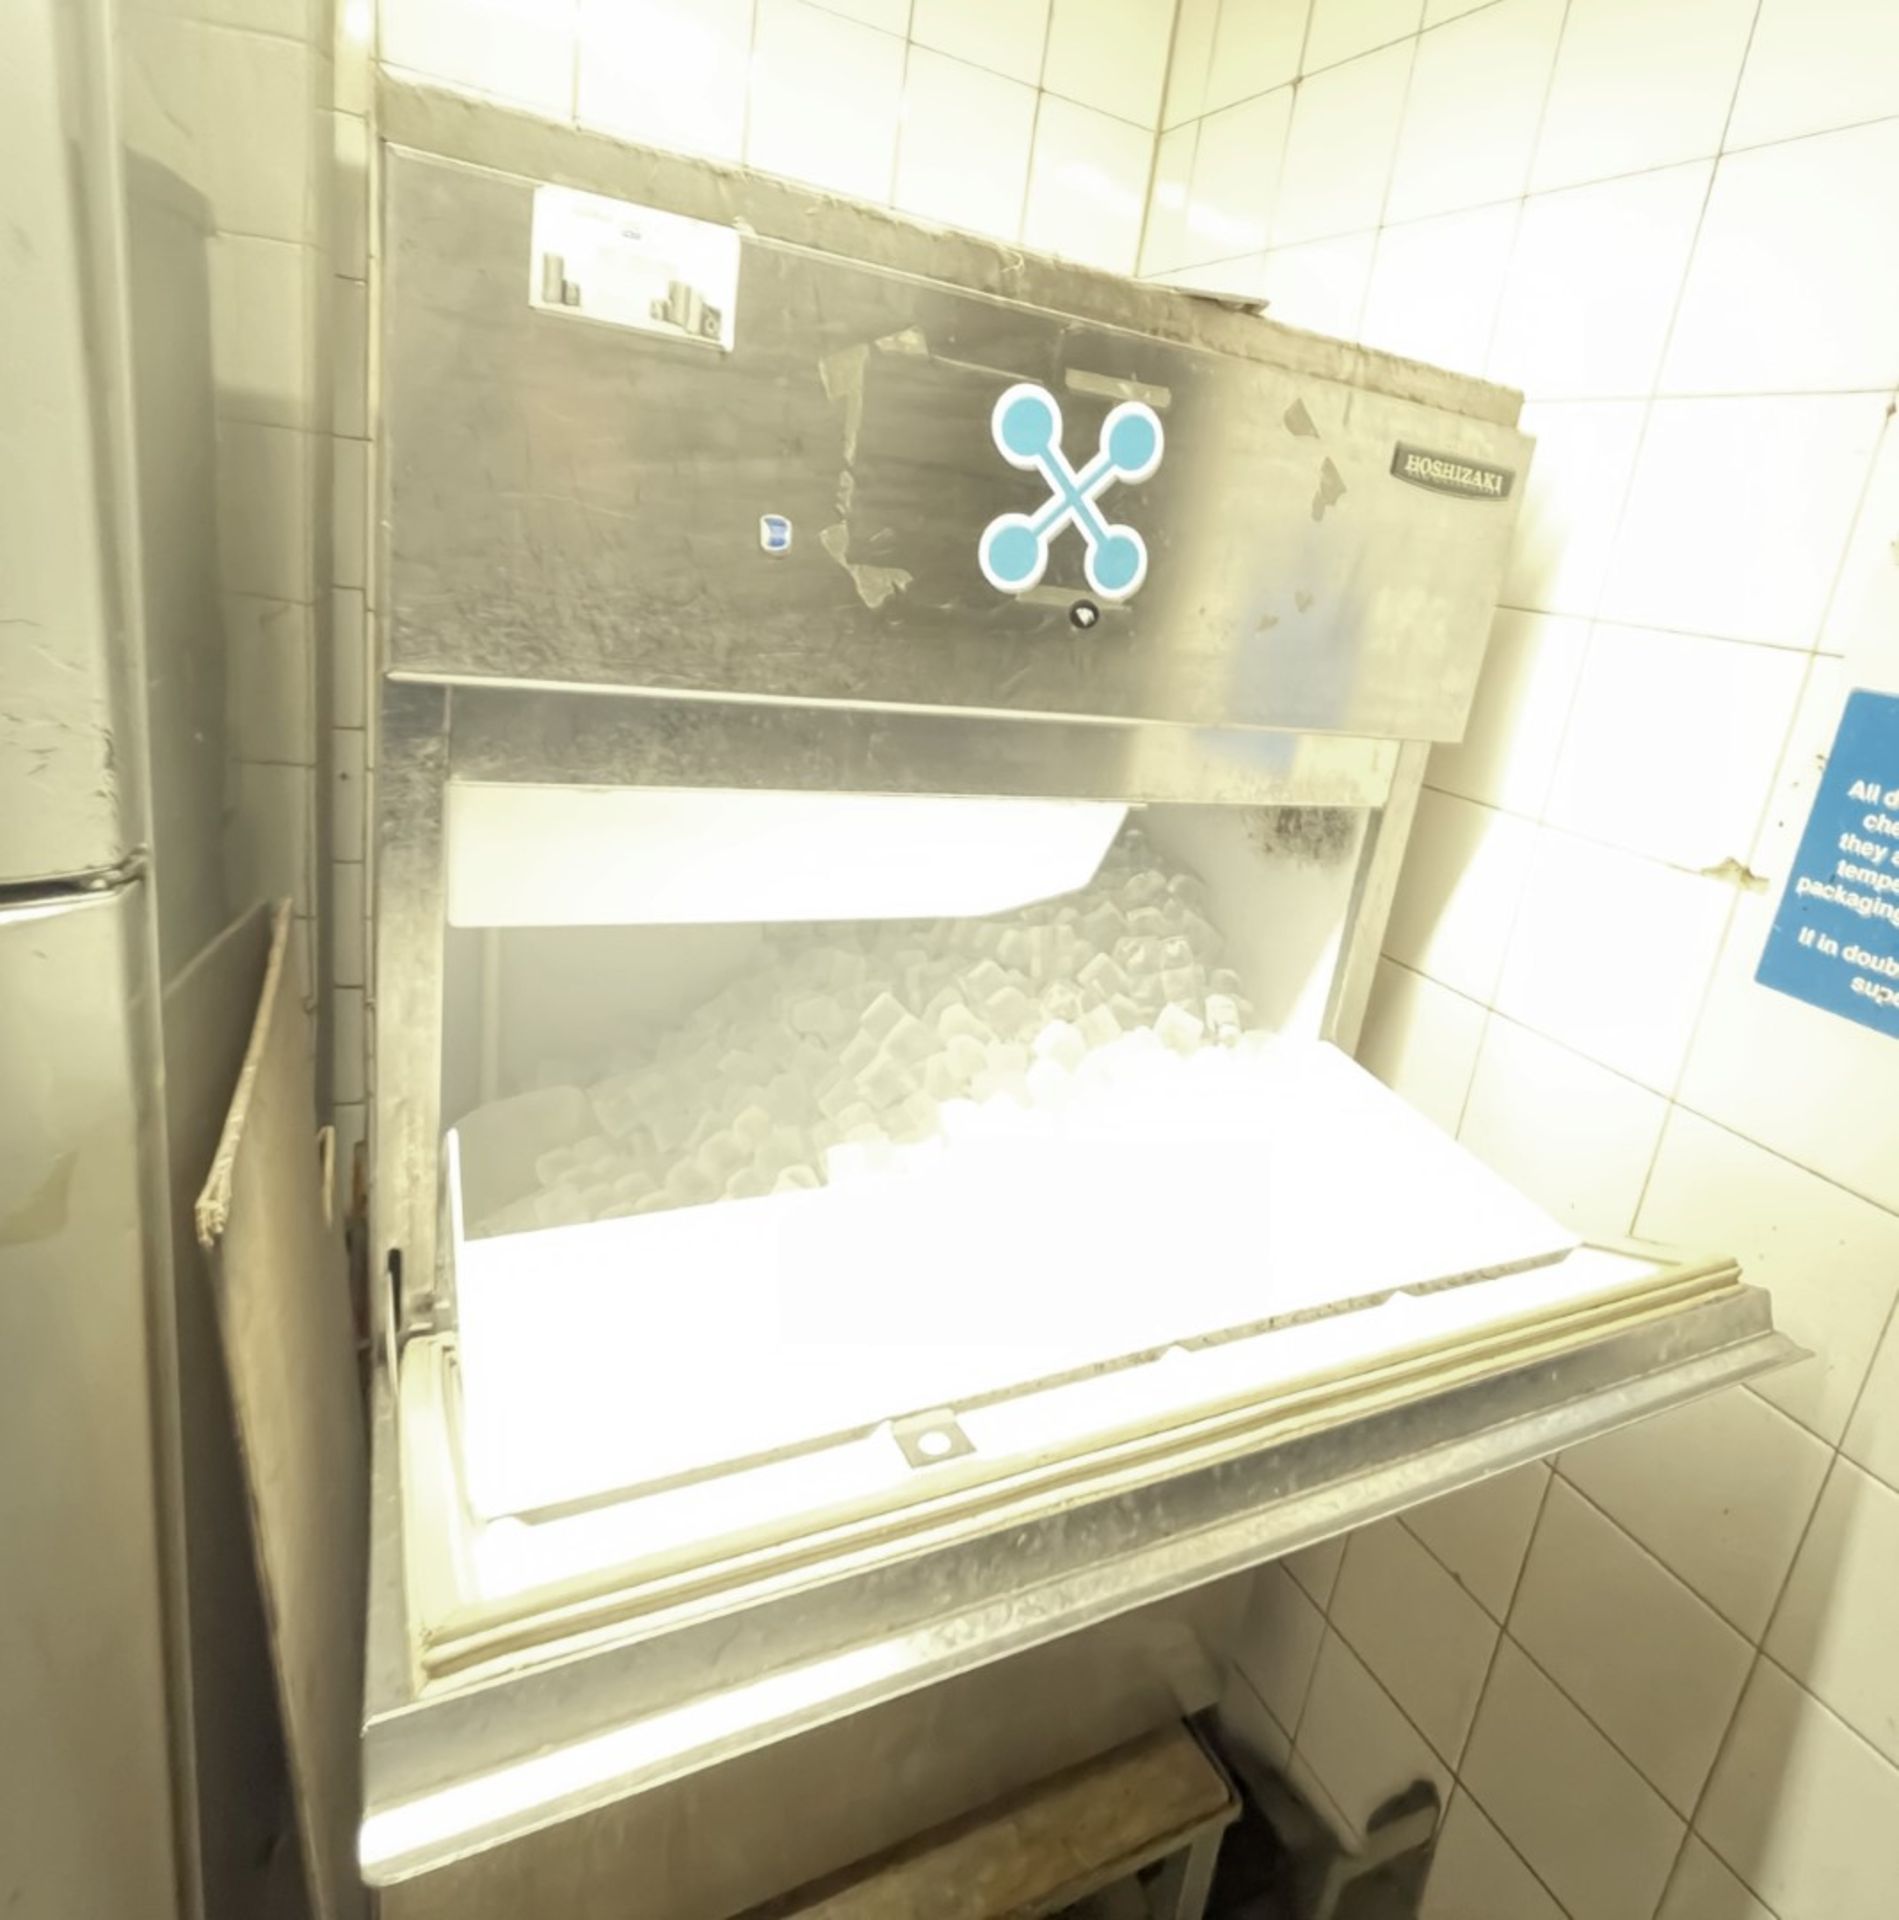 1 x HOSHIZAKI Commercial Stainless Steel Water Cooled Ice Cube Maker IM-100WLE - Image 6 of 6